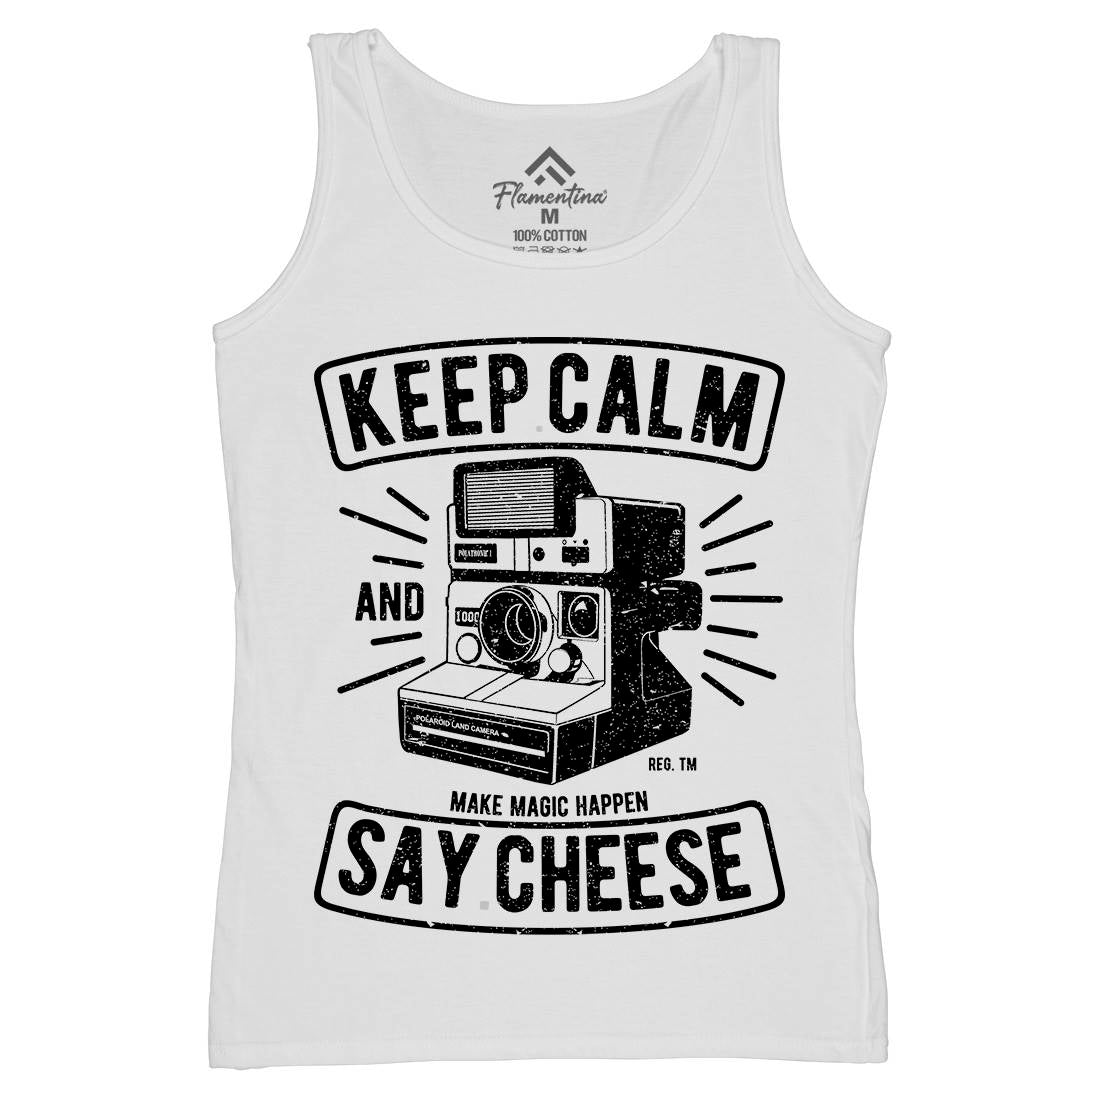 Keep Calm And Say Cheese Womens Organic Tank Top Vest Media A699